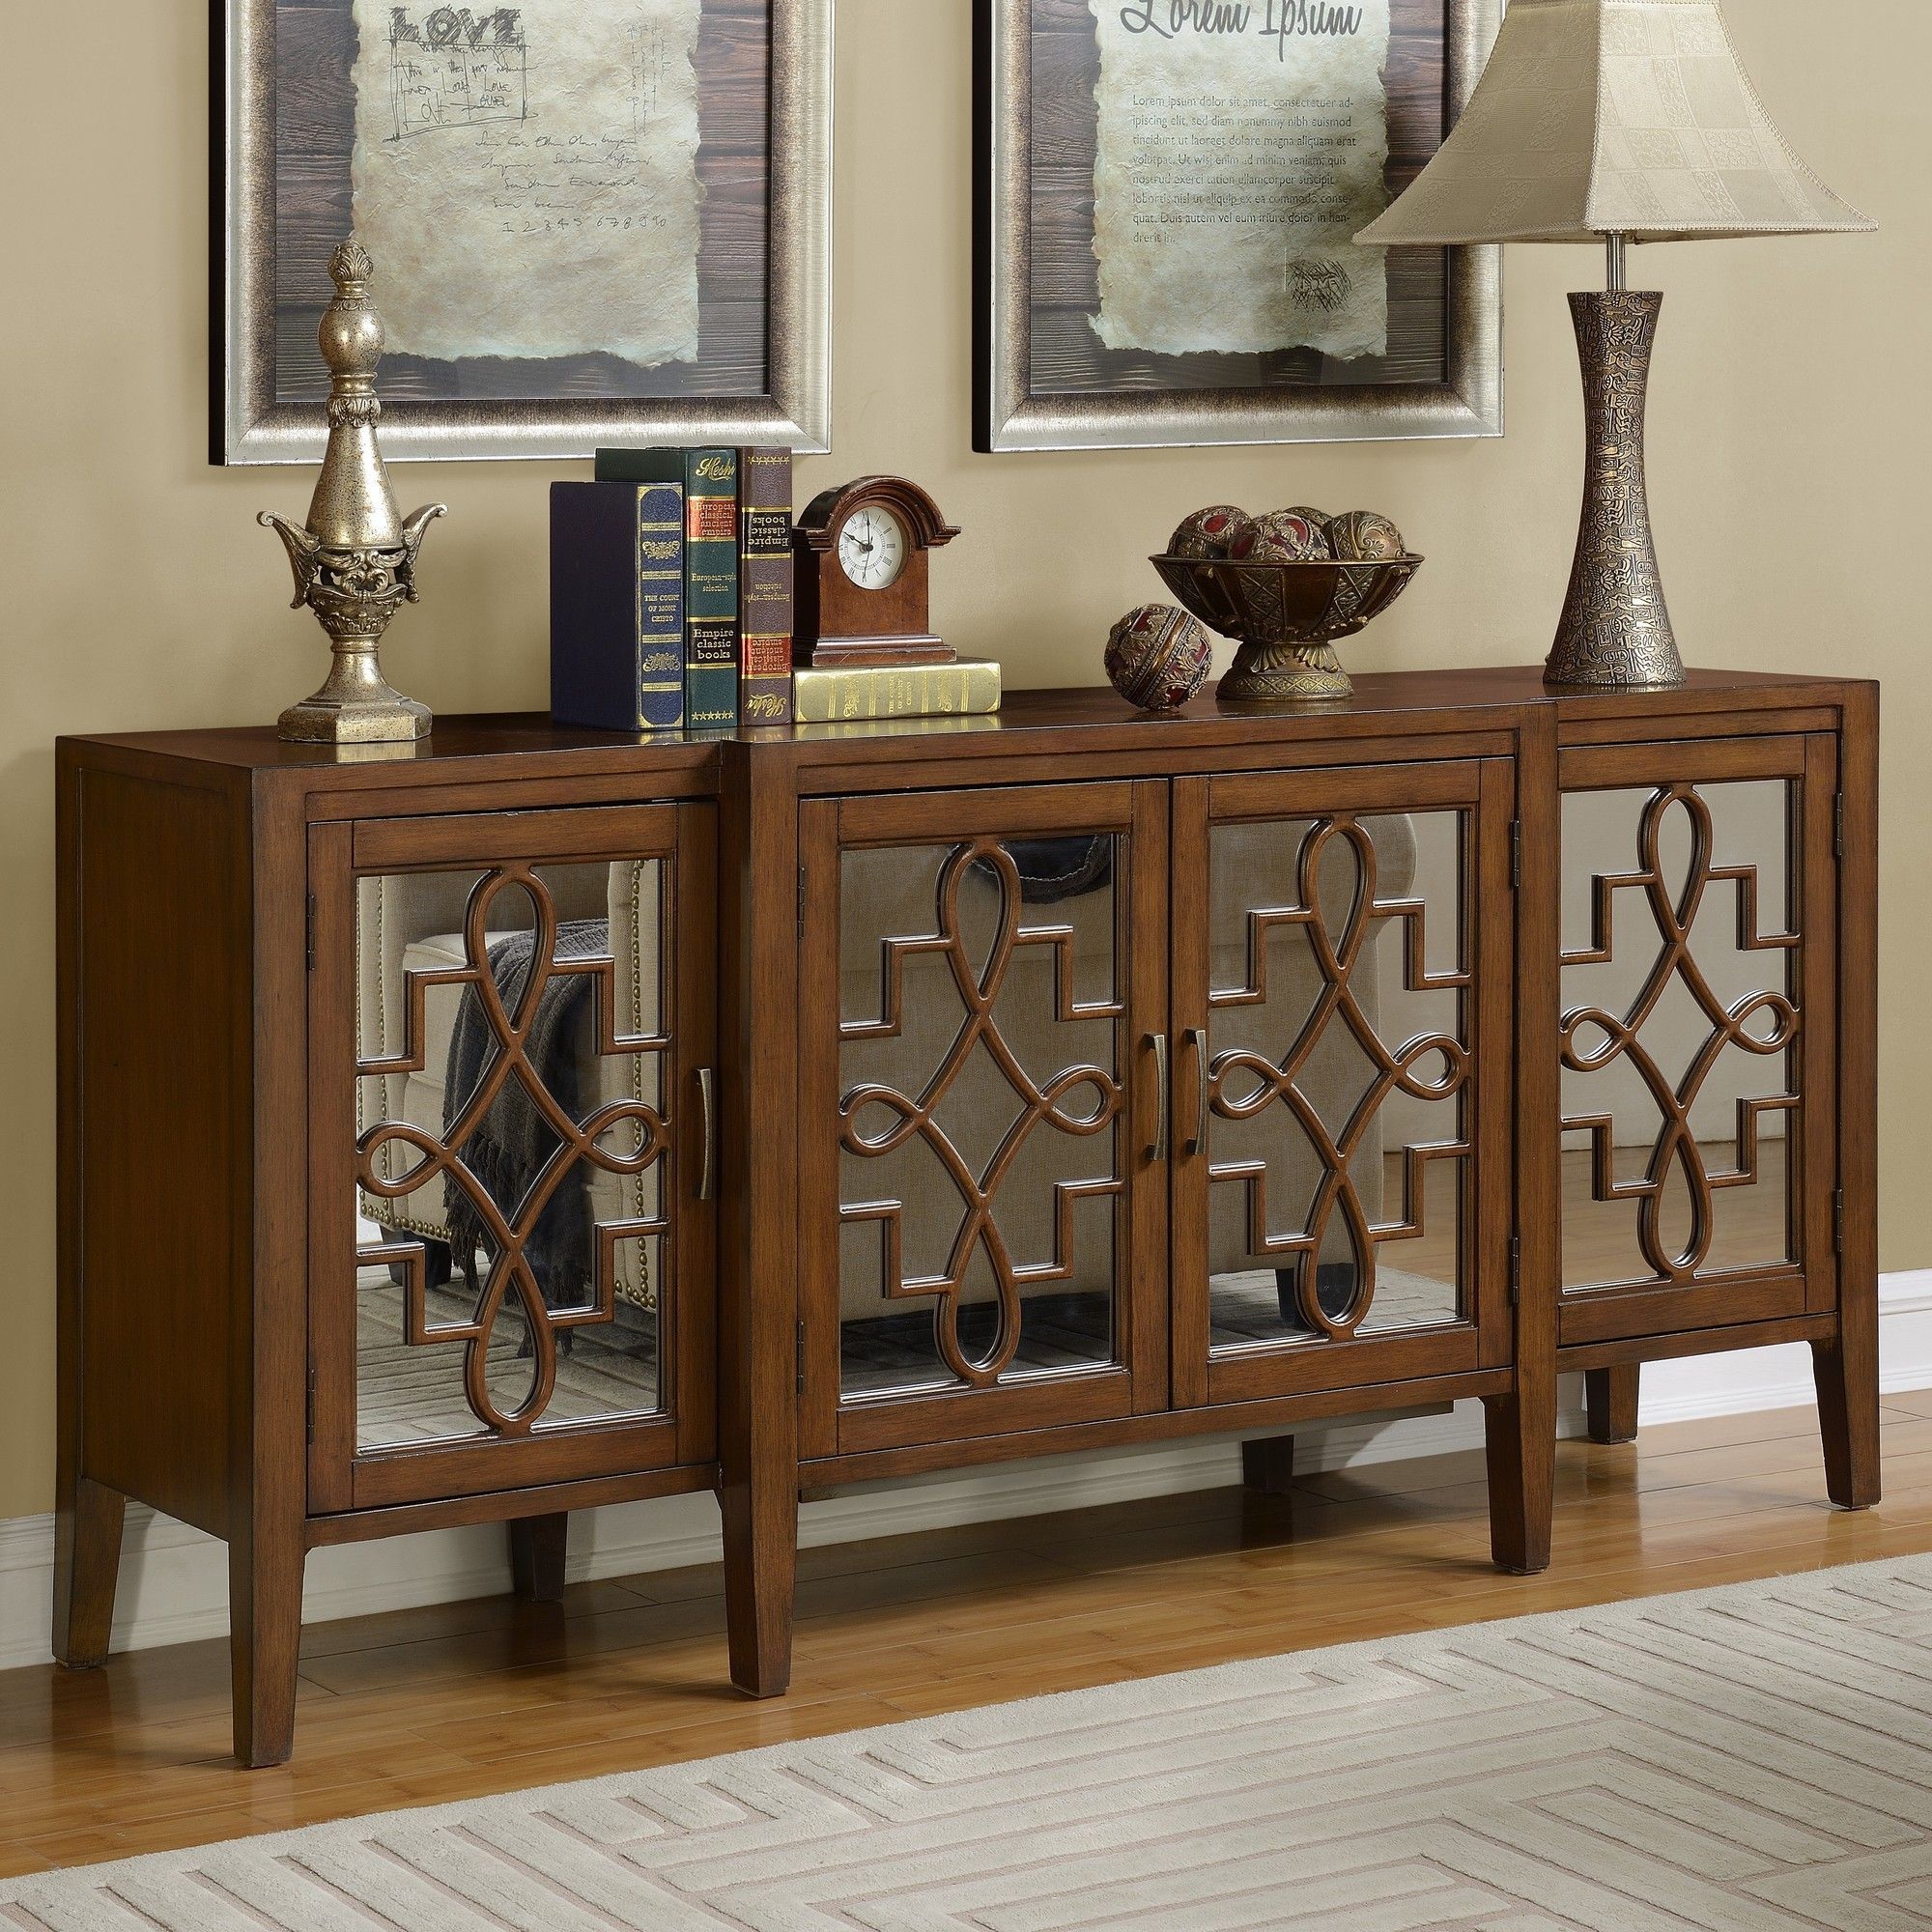 Manry Credenza | Products | Sideboard, Sideboard Buffet Intended For Current Lowrey Credenzas (View 15 of 20)